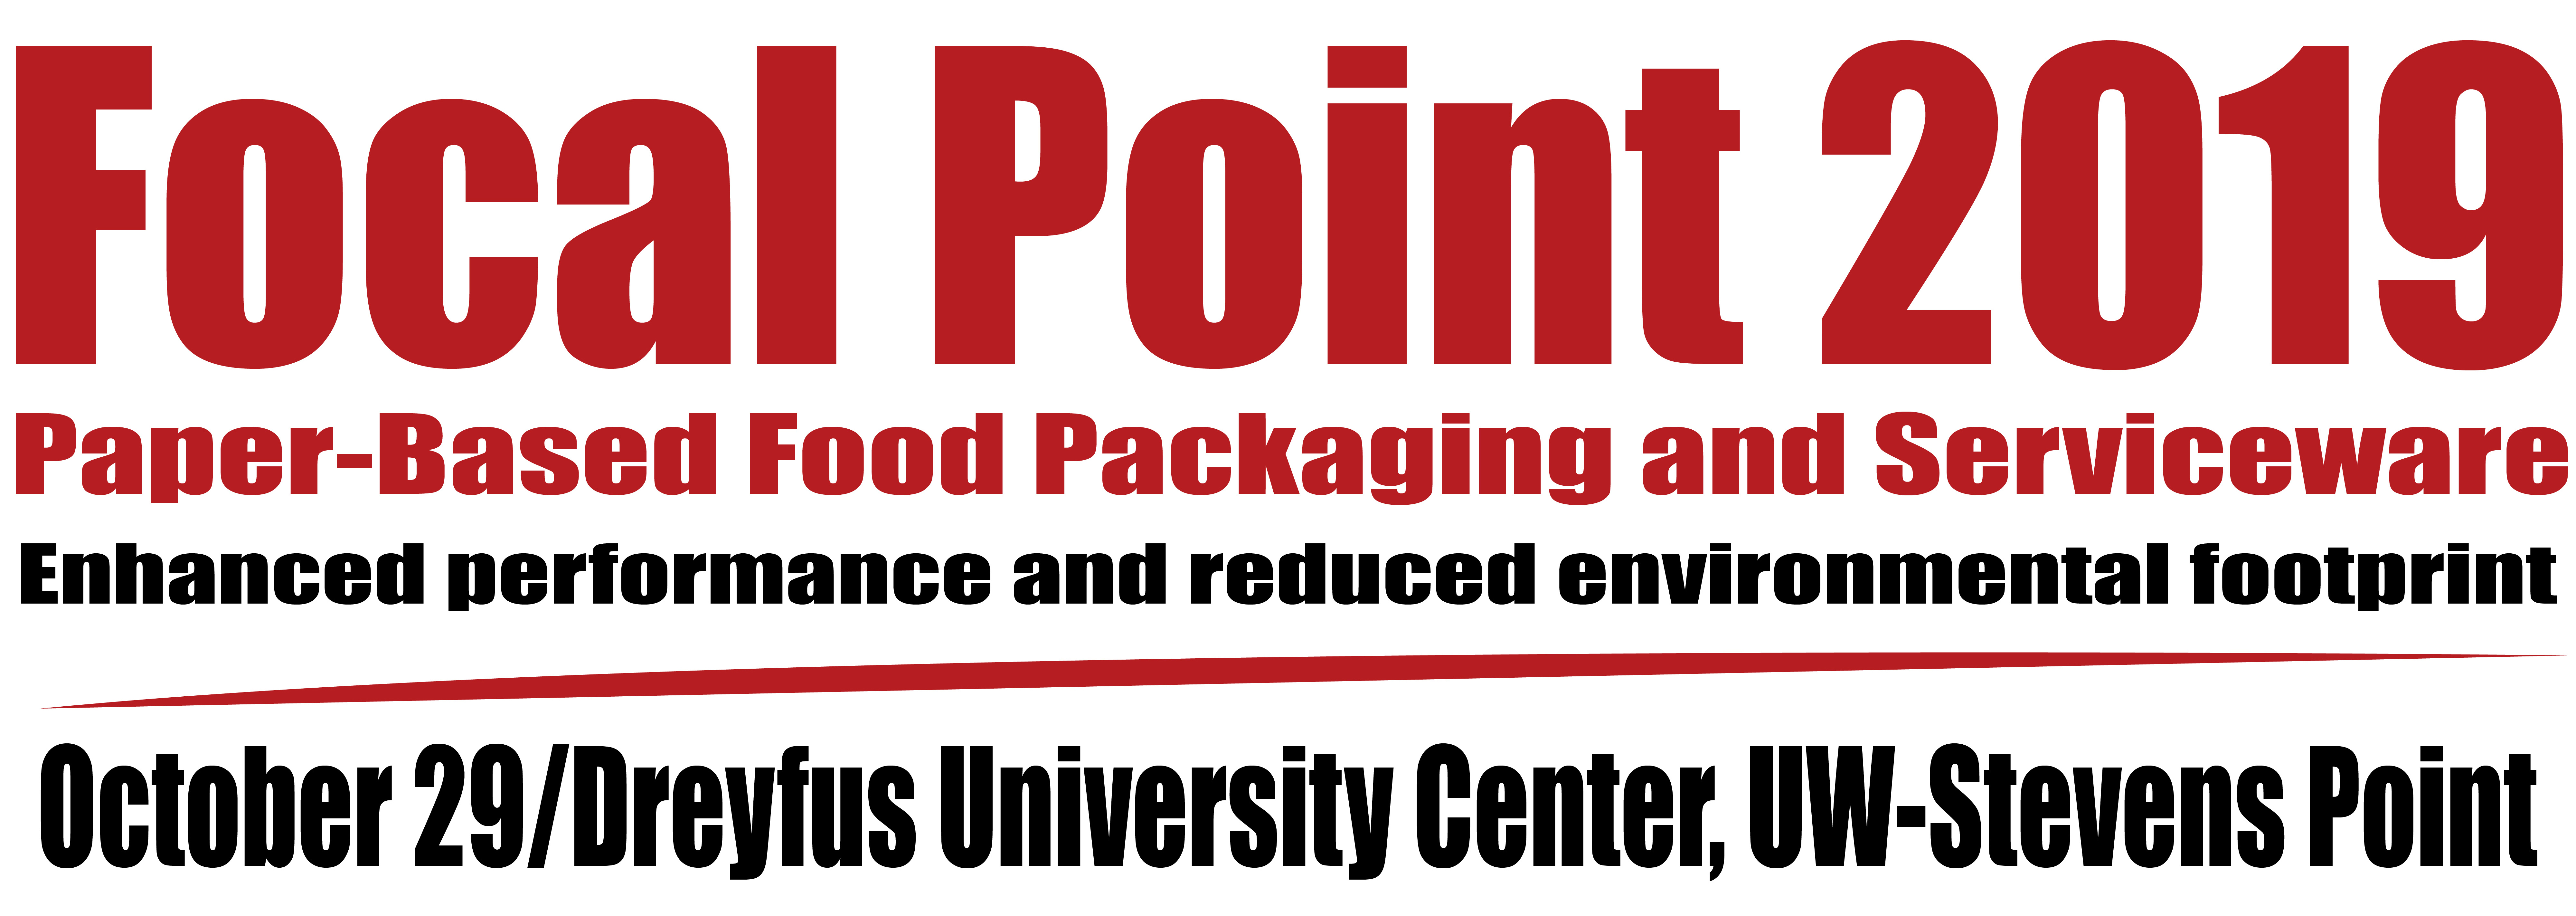 Focal Point Annual Conference Logo -- Paper-Based Food Packaging and Serviceware